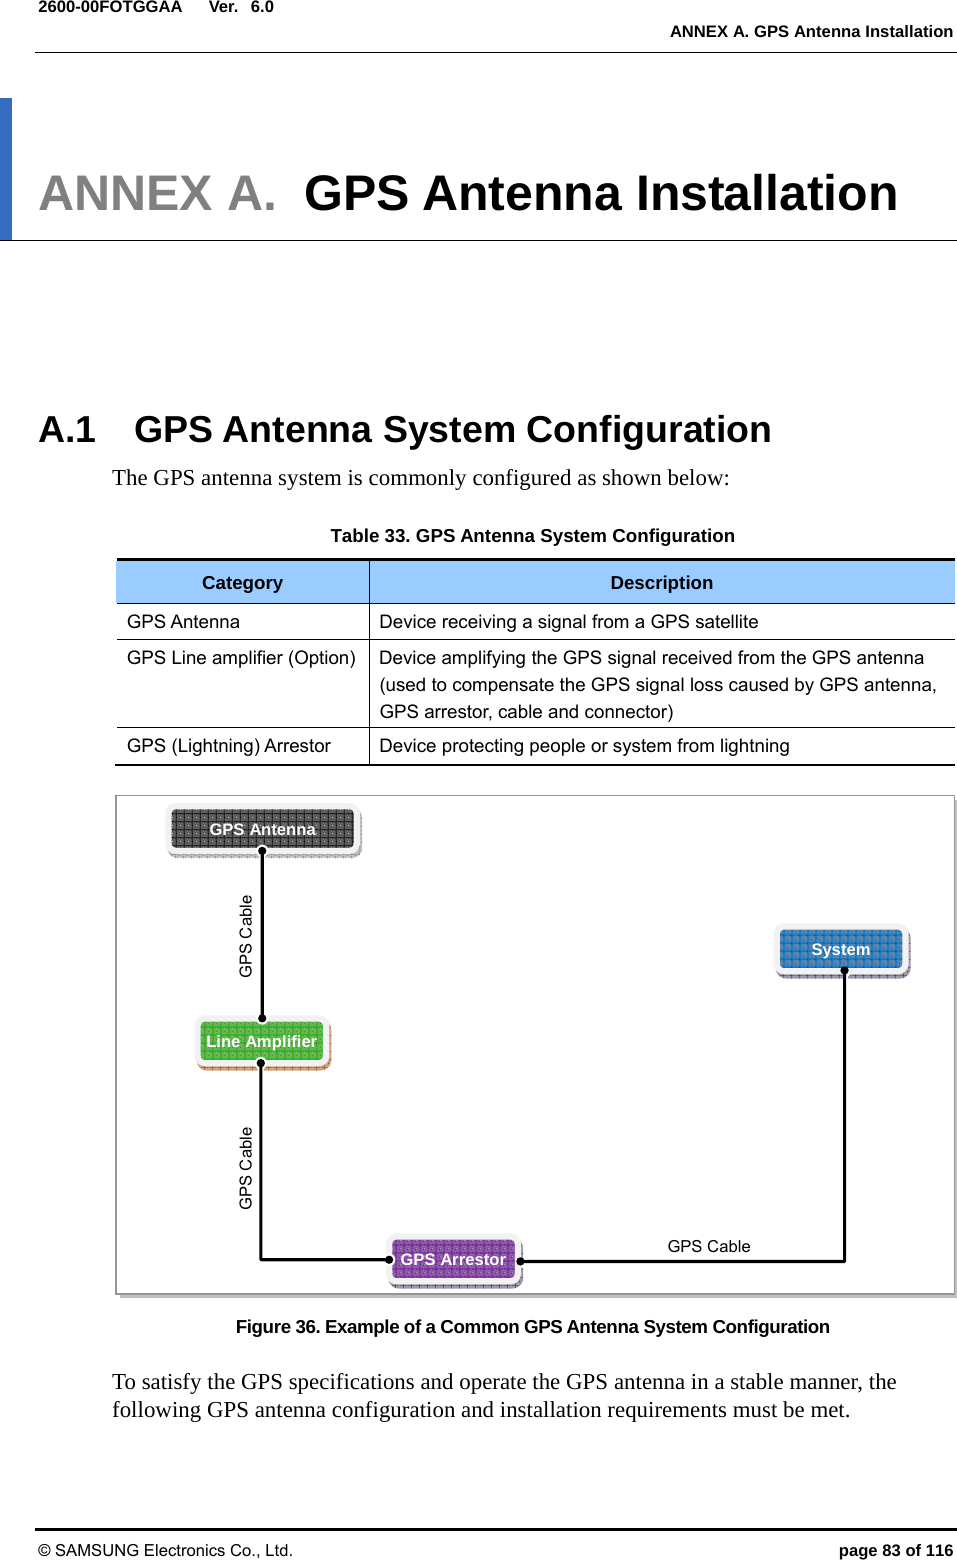  Ver.  ANNEX A. GPS Antenna Installation © SAMSUNG Electronics Co., Ltd.  page 83 of 116 2600-00FOTGGAA 6.0 ANNEX A.  GPS Antenna Installation      A.1  GPS Antenna System Configuration The GPS antenna system is commonly configured as shown below:  Table 33. GPS Antenna System Configuration Category  Description GPS Antenna  Device receiving a signal from a GPS satellite GPS Line amplifier (Option)  Device amplifying the GPS signal received from the GPS antenna (used to compensate the GPS signal loss caused by GPS antenna, GPS arrestor, cable and connector) GPS (Lightning) Arrestor  Device protecting people or system from lightning  Figure 36. Example of a Common GPS Antenna System Configuration  To satisfy the GPS specifications and operate the GPS antenna in a stable manner, the following GPS antenna configuration and installation requirements must be met. GPS ArrestorSystem Line Amplifier GPS Antenna GPS Cable GPS Cable GPS Cable 